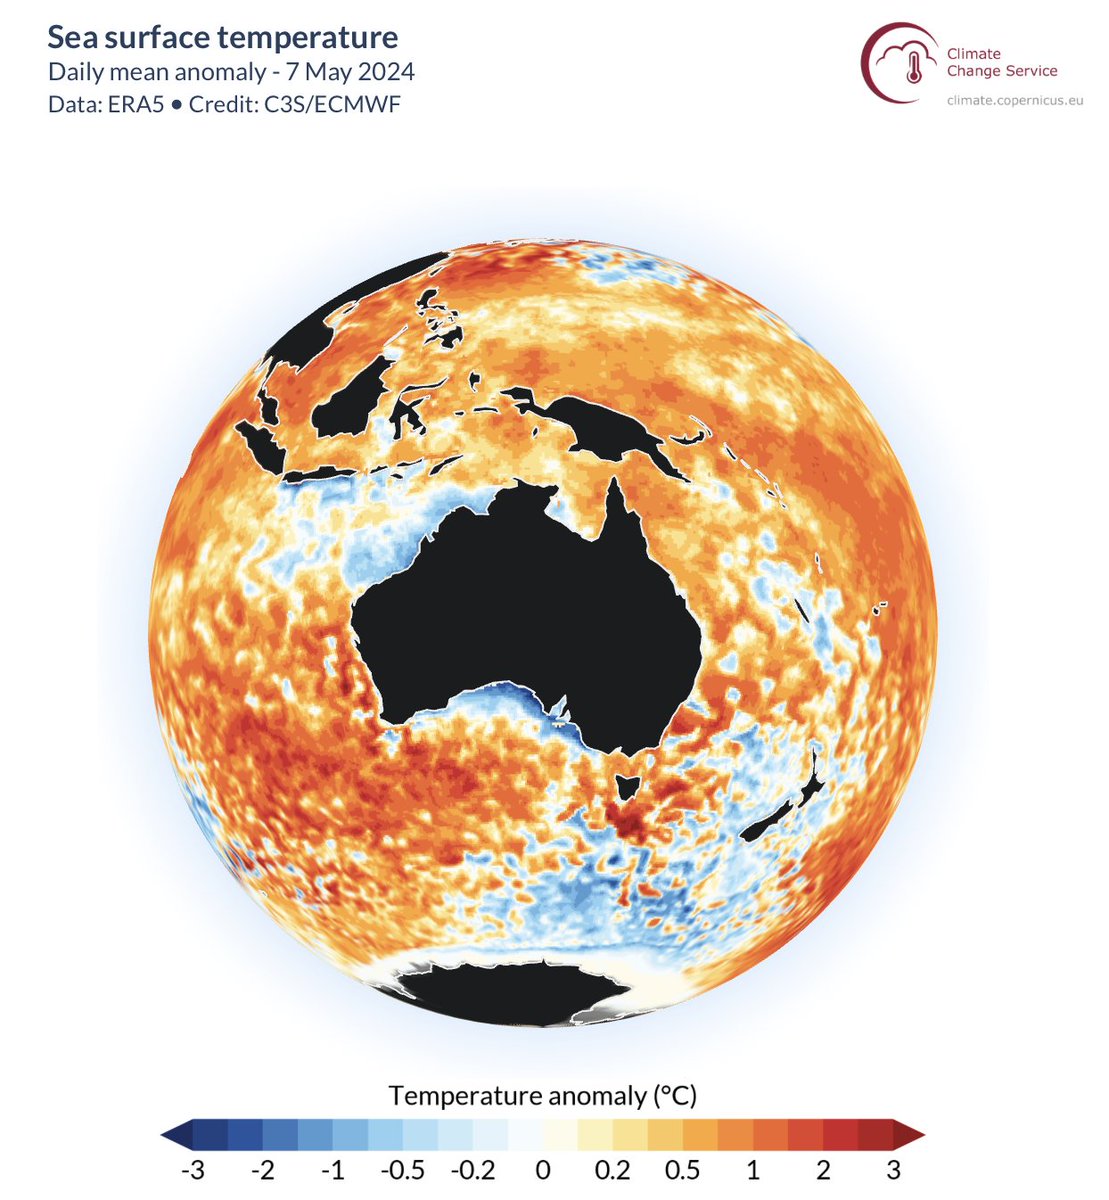 We keep voting in people that are okay with prolonging the world's reliance on fossil fuels, the very thing that is cooking our planet. Meanwhile, check out the ocean temperatures around Australia as we approach winter...